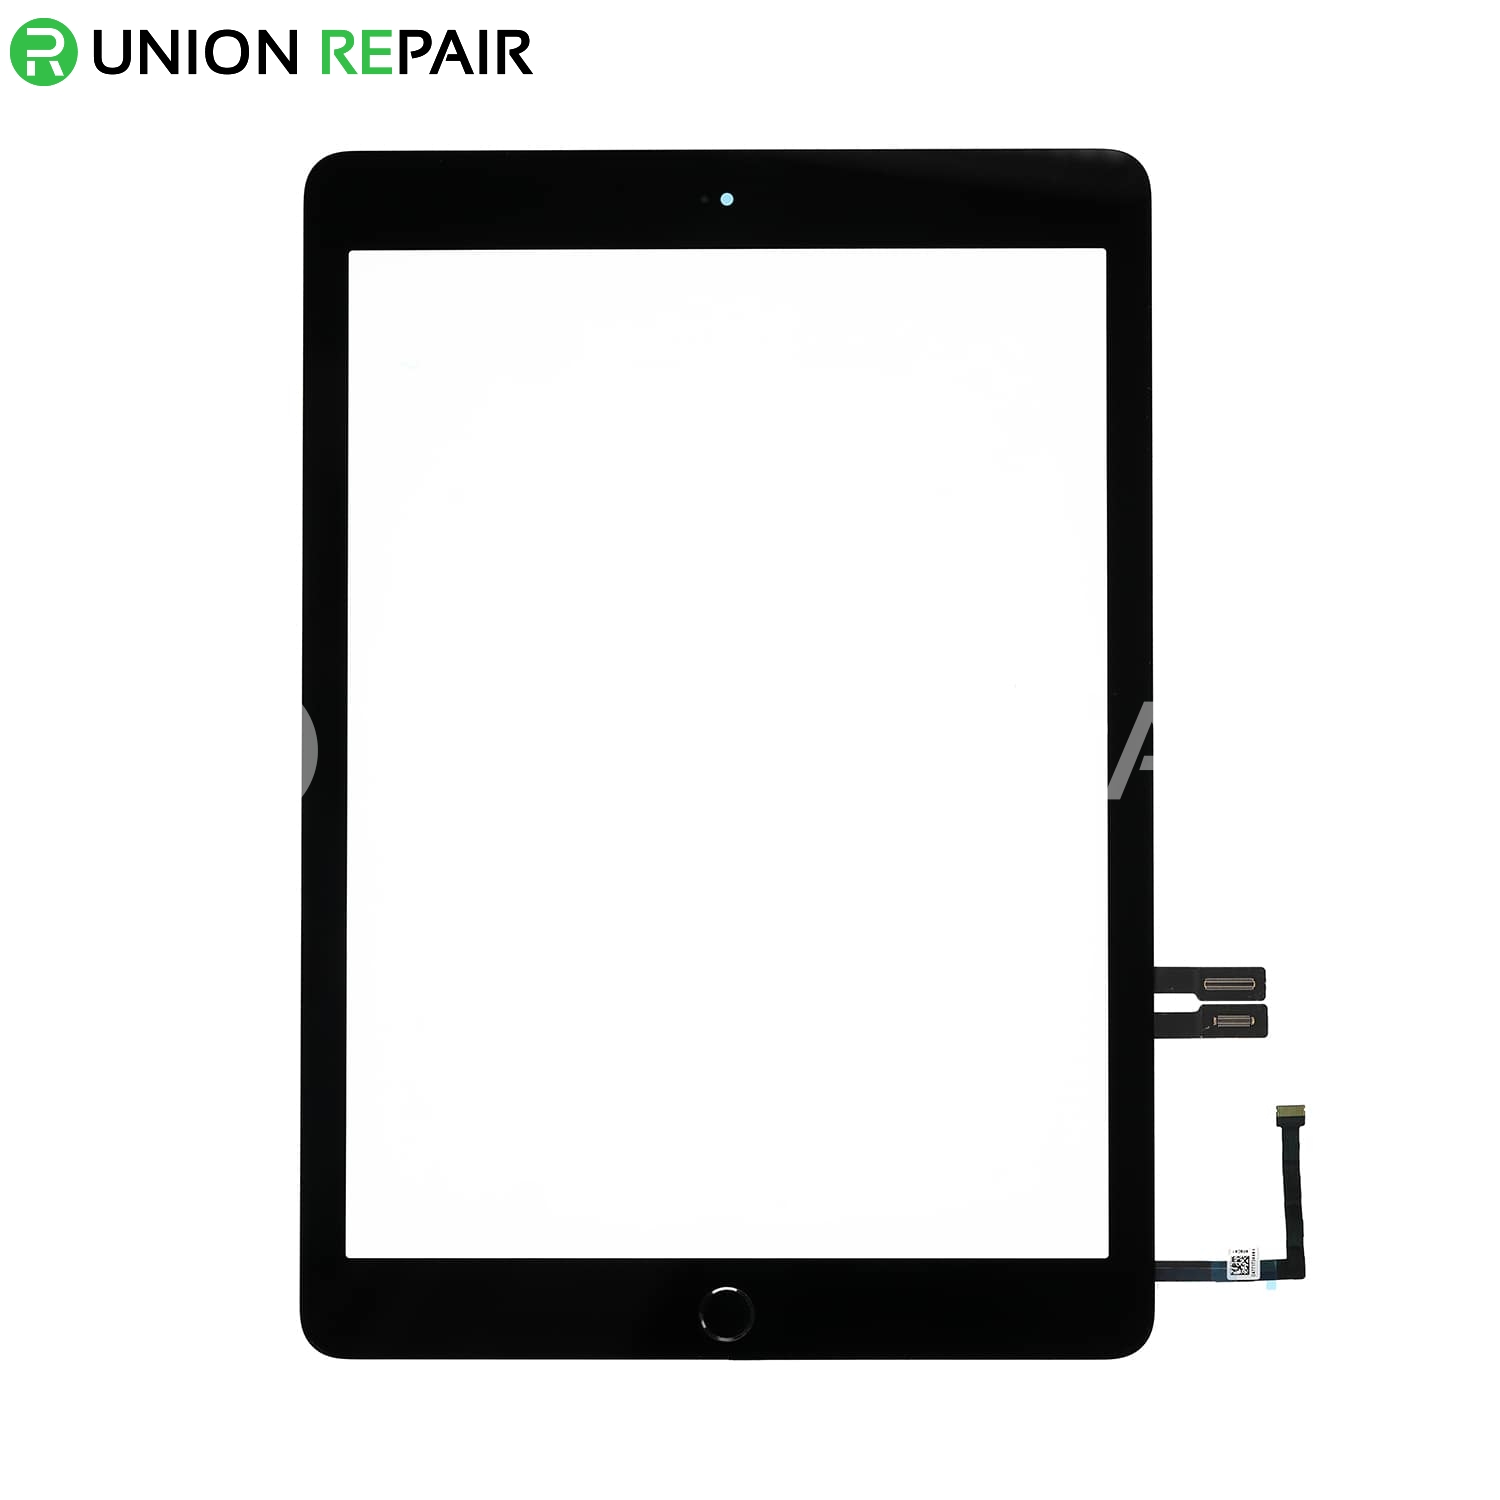 Front Panel Touch Screen Glass Digitizer Home Button Assembly for iPad 2 Black